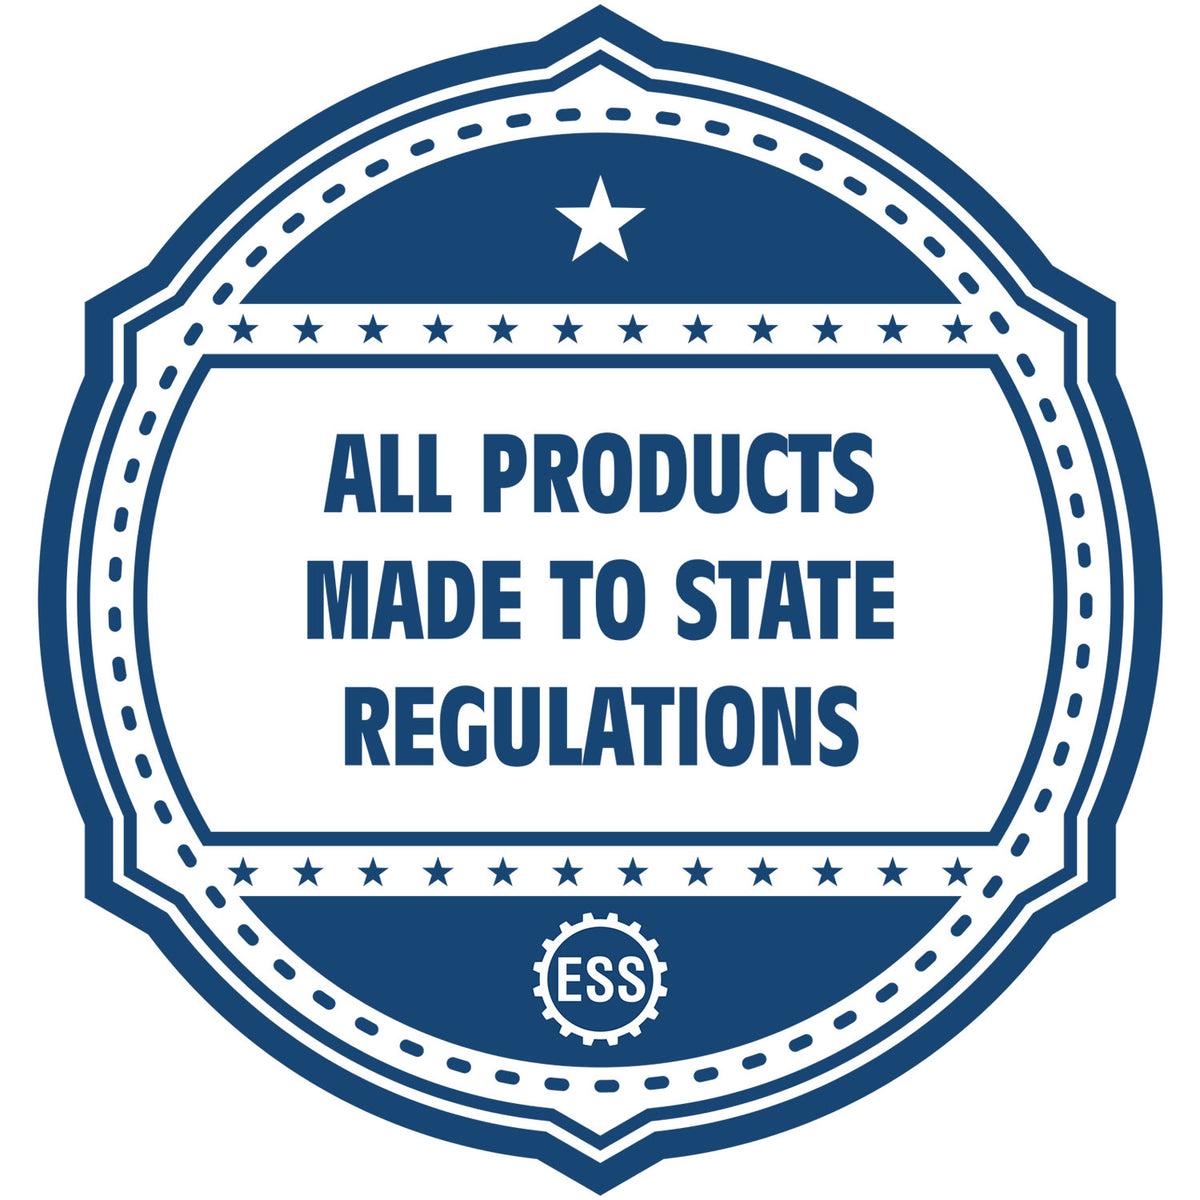 An icon or badge element for the Tennessee Professional Engineer Seal Stamp showing that this product is made in compliance with state regulations.